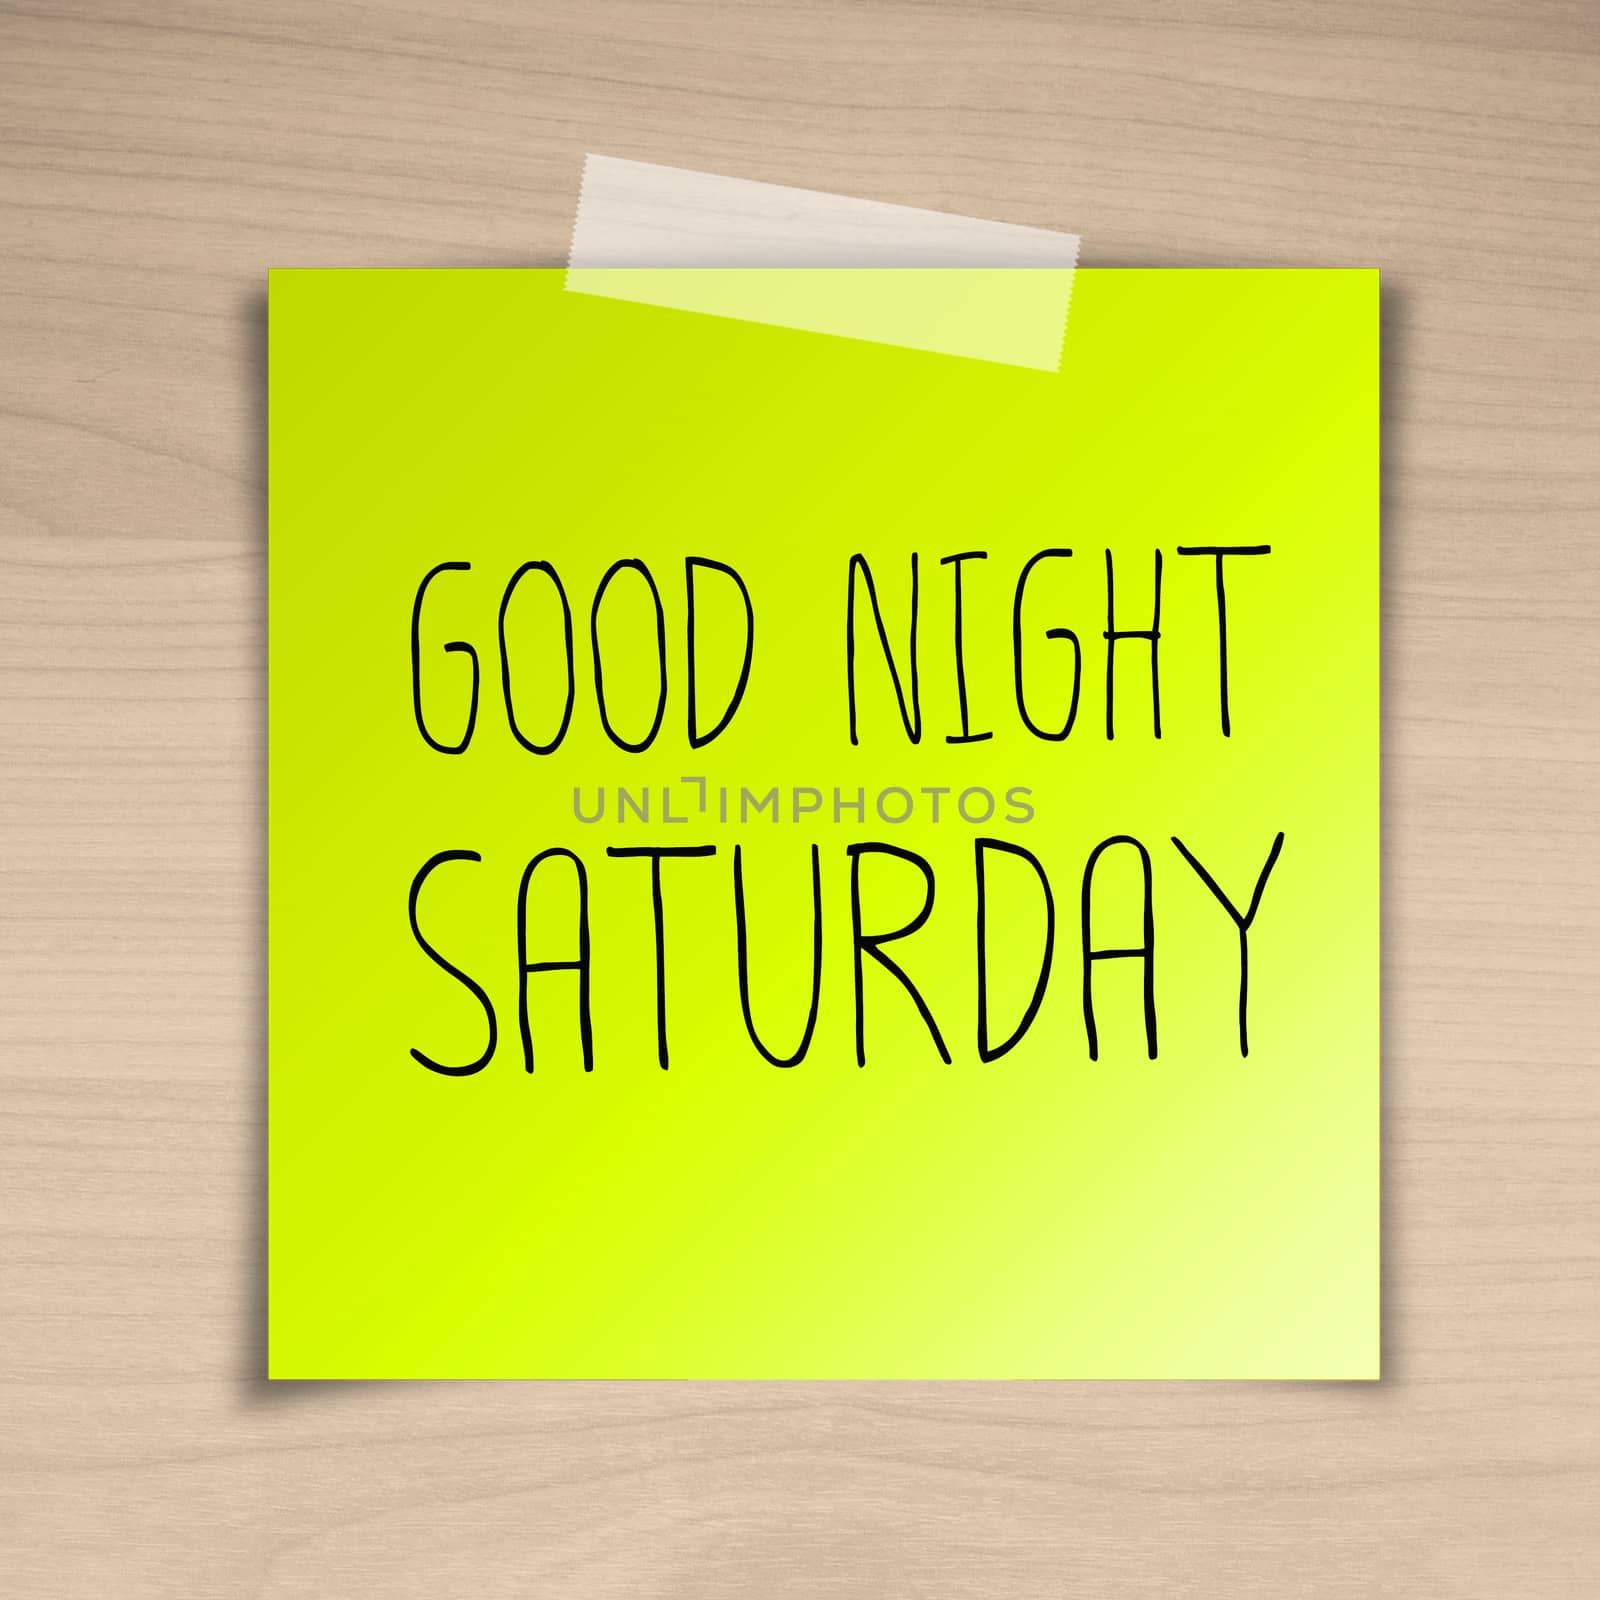 Good night saturday sticky paper on brown wood background textur by 2nix